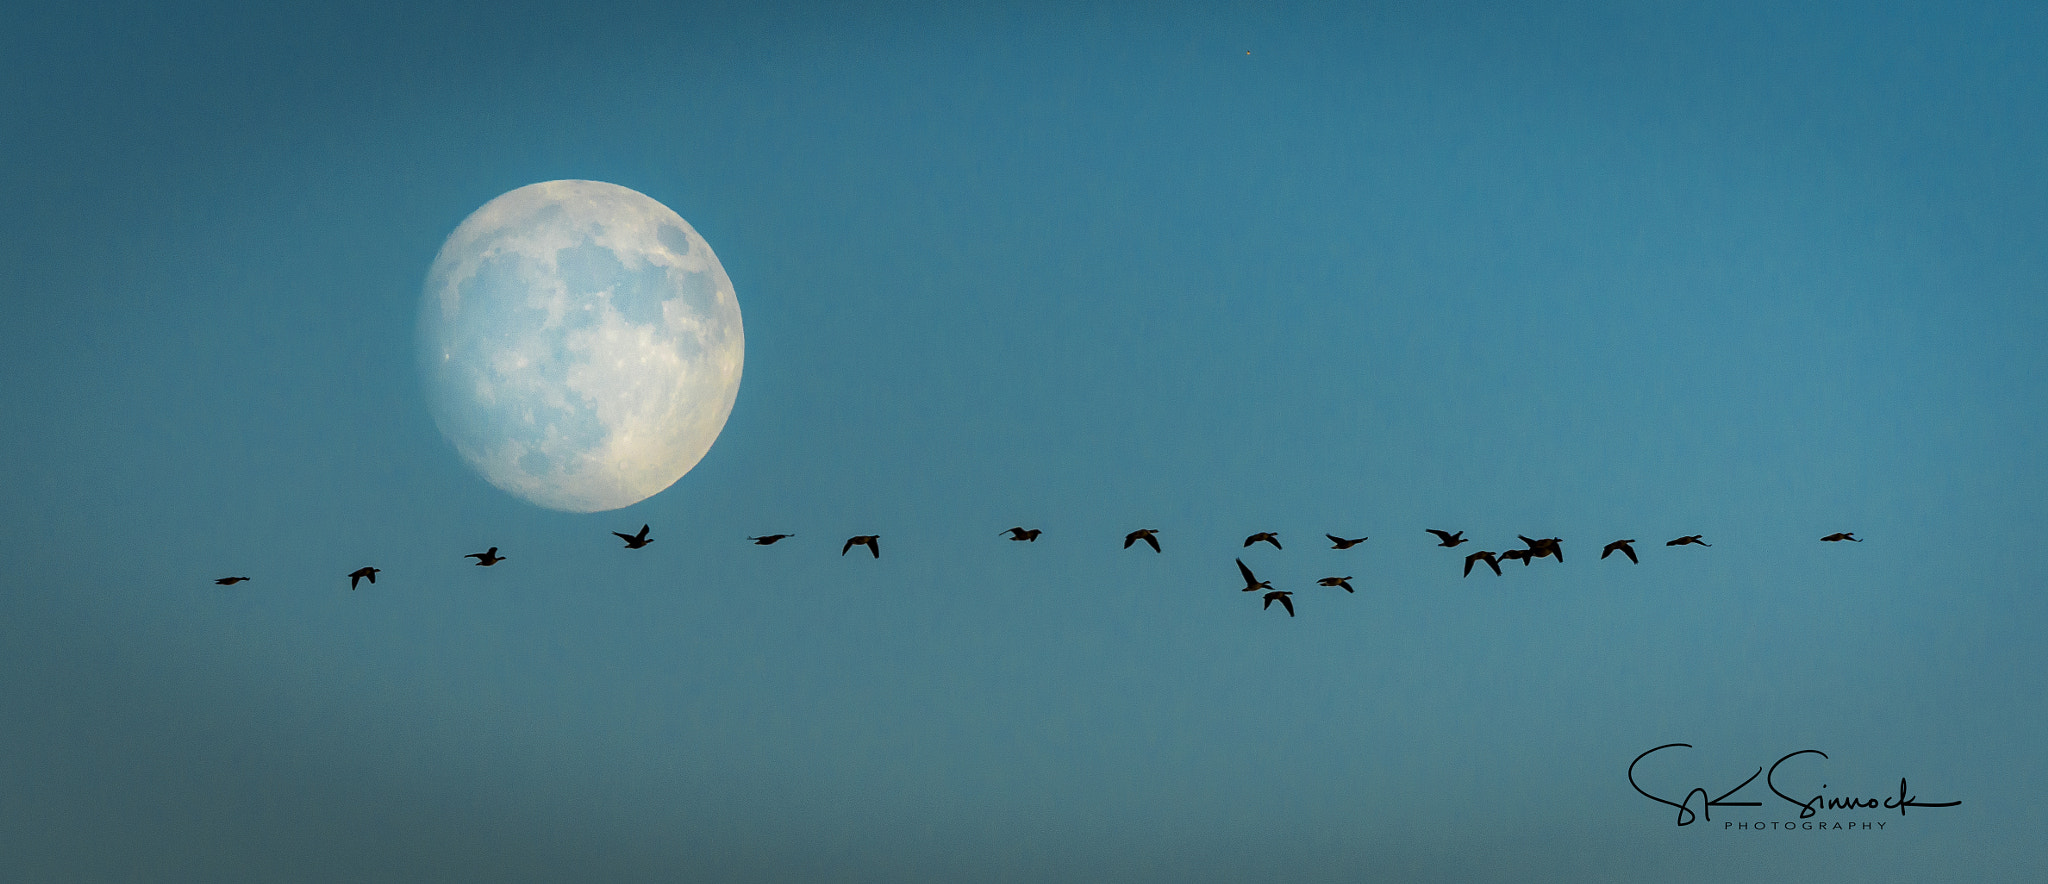 Nikon D800 sample photo. Geese and super moon photography